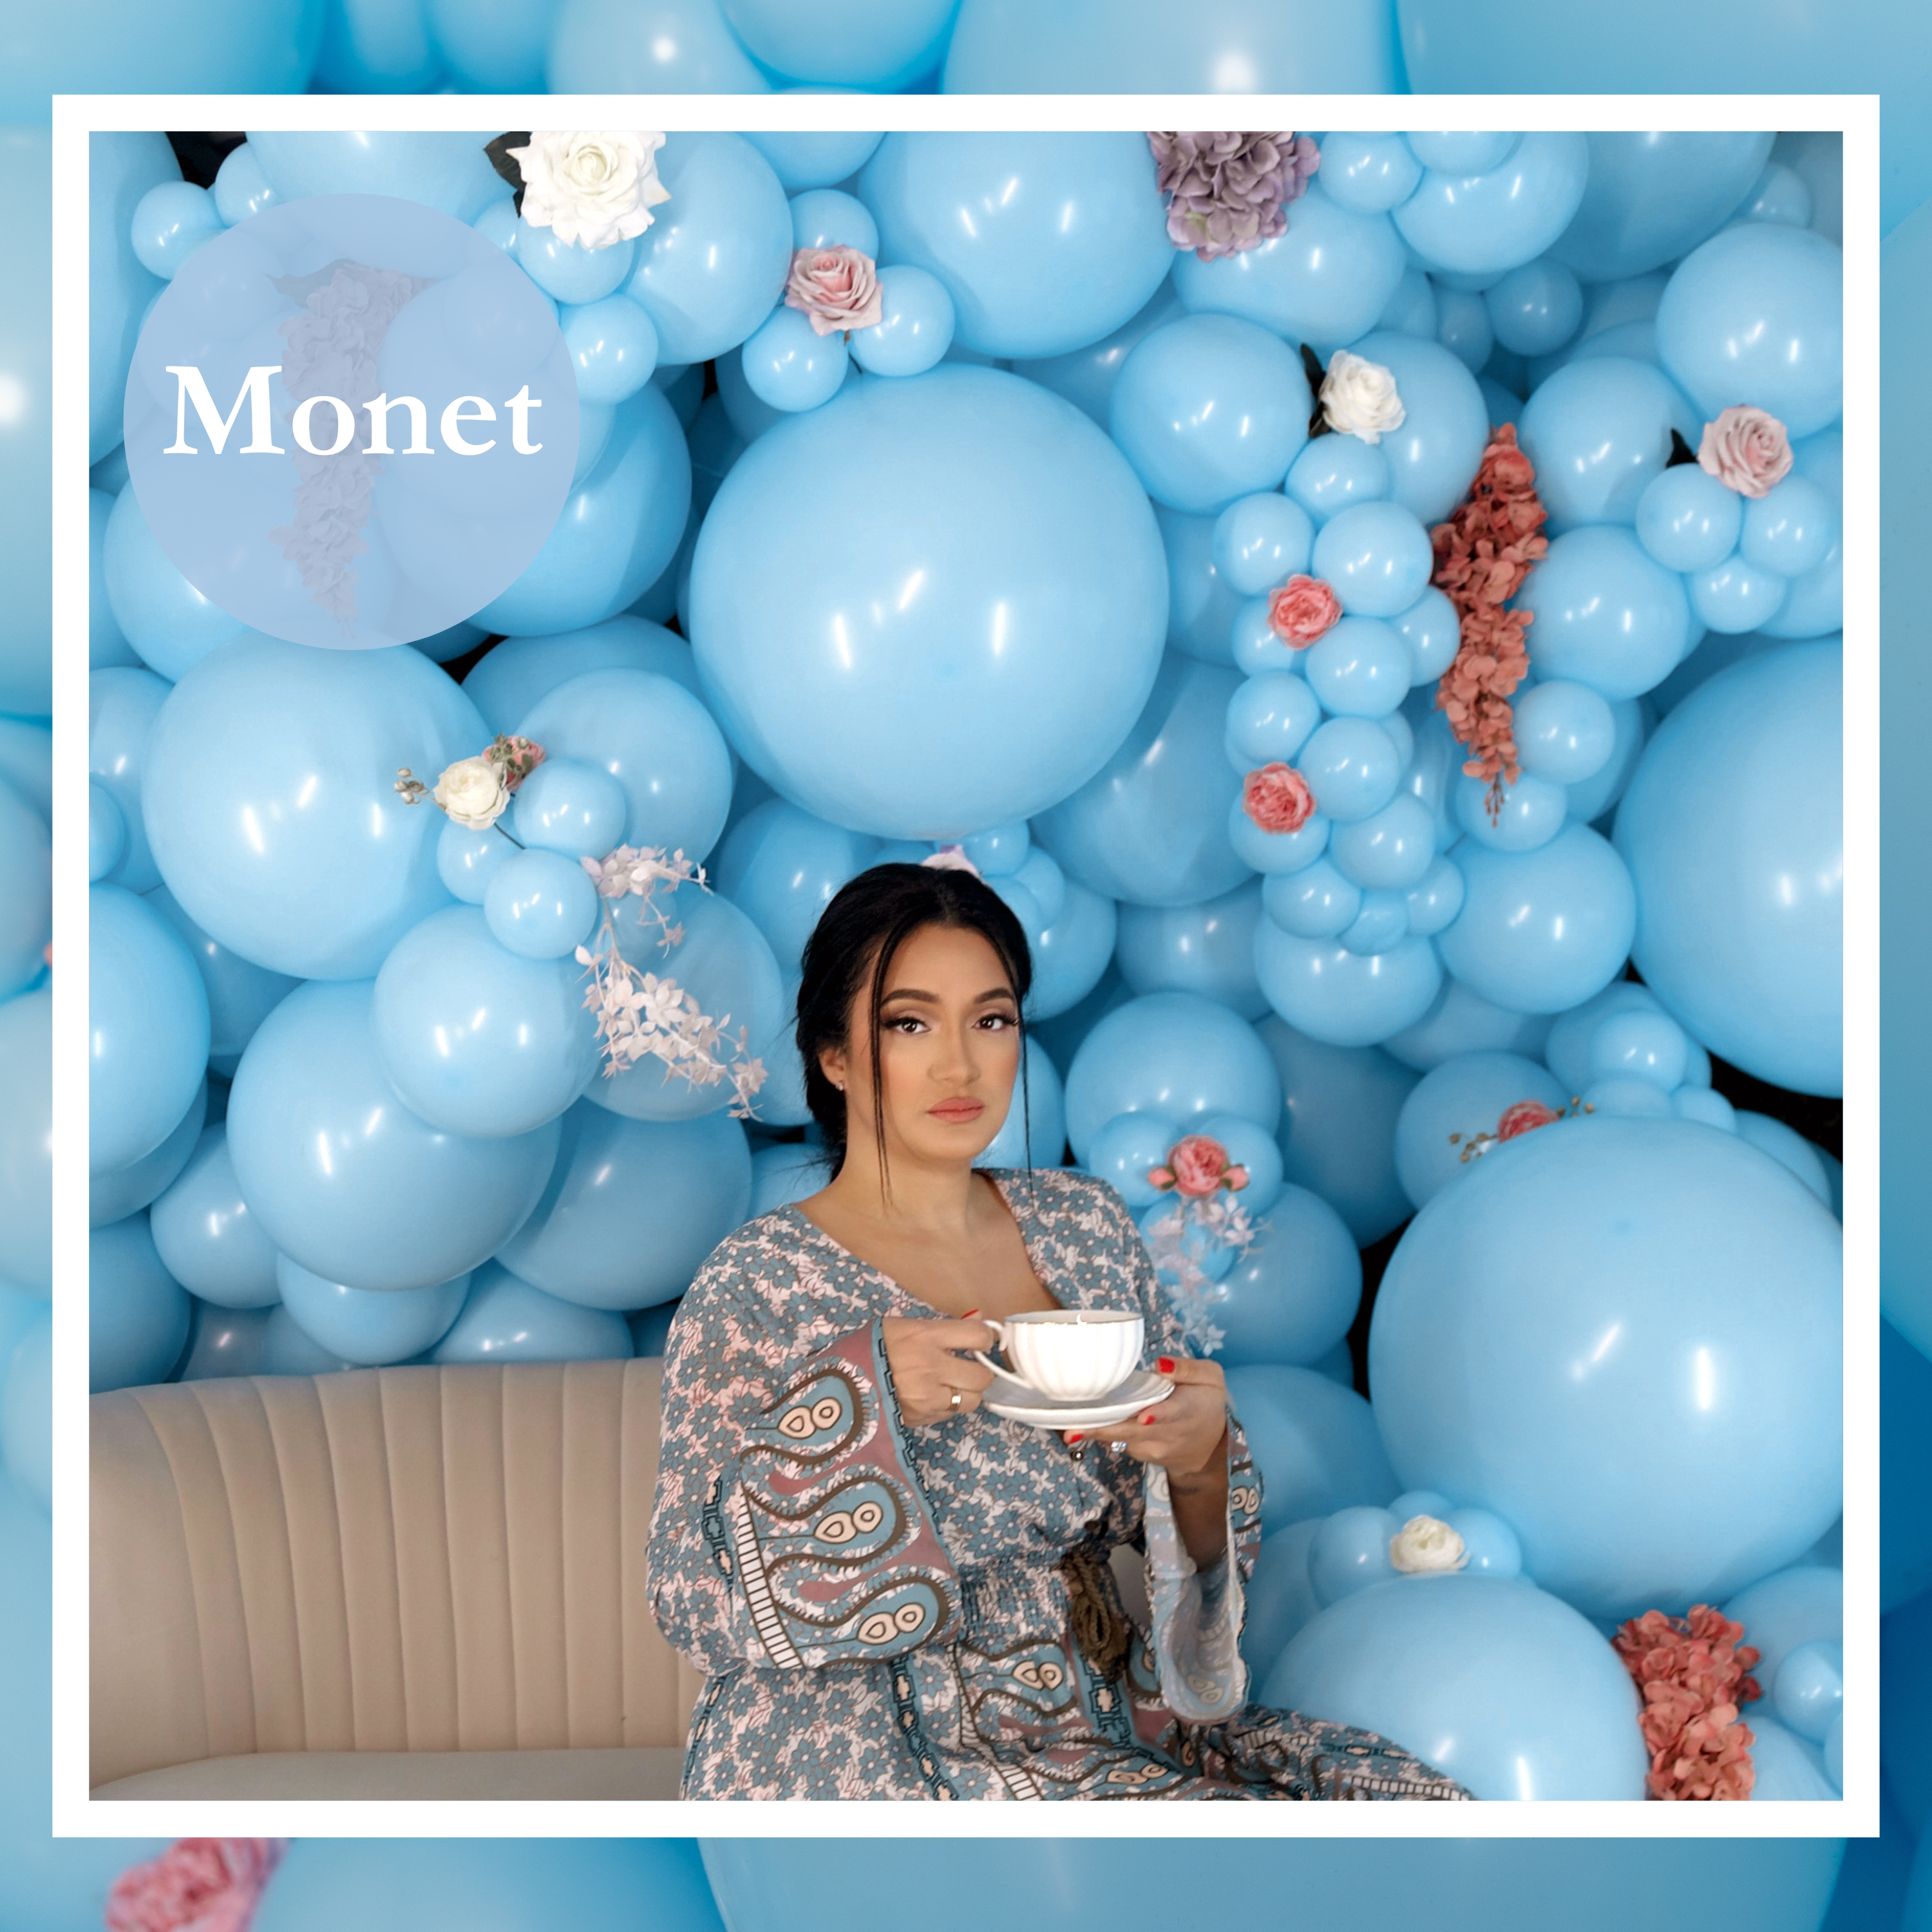 36" TUFTEX Monet - Baby Blue Latex Balloons - 3 Foot Giant | 2 Count